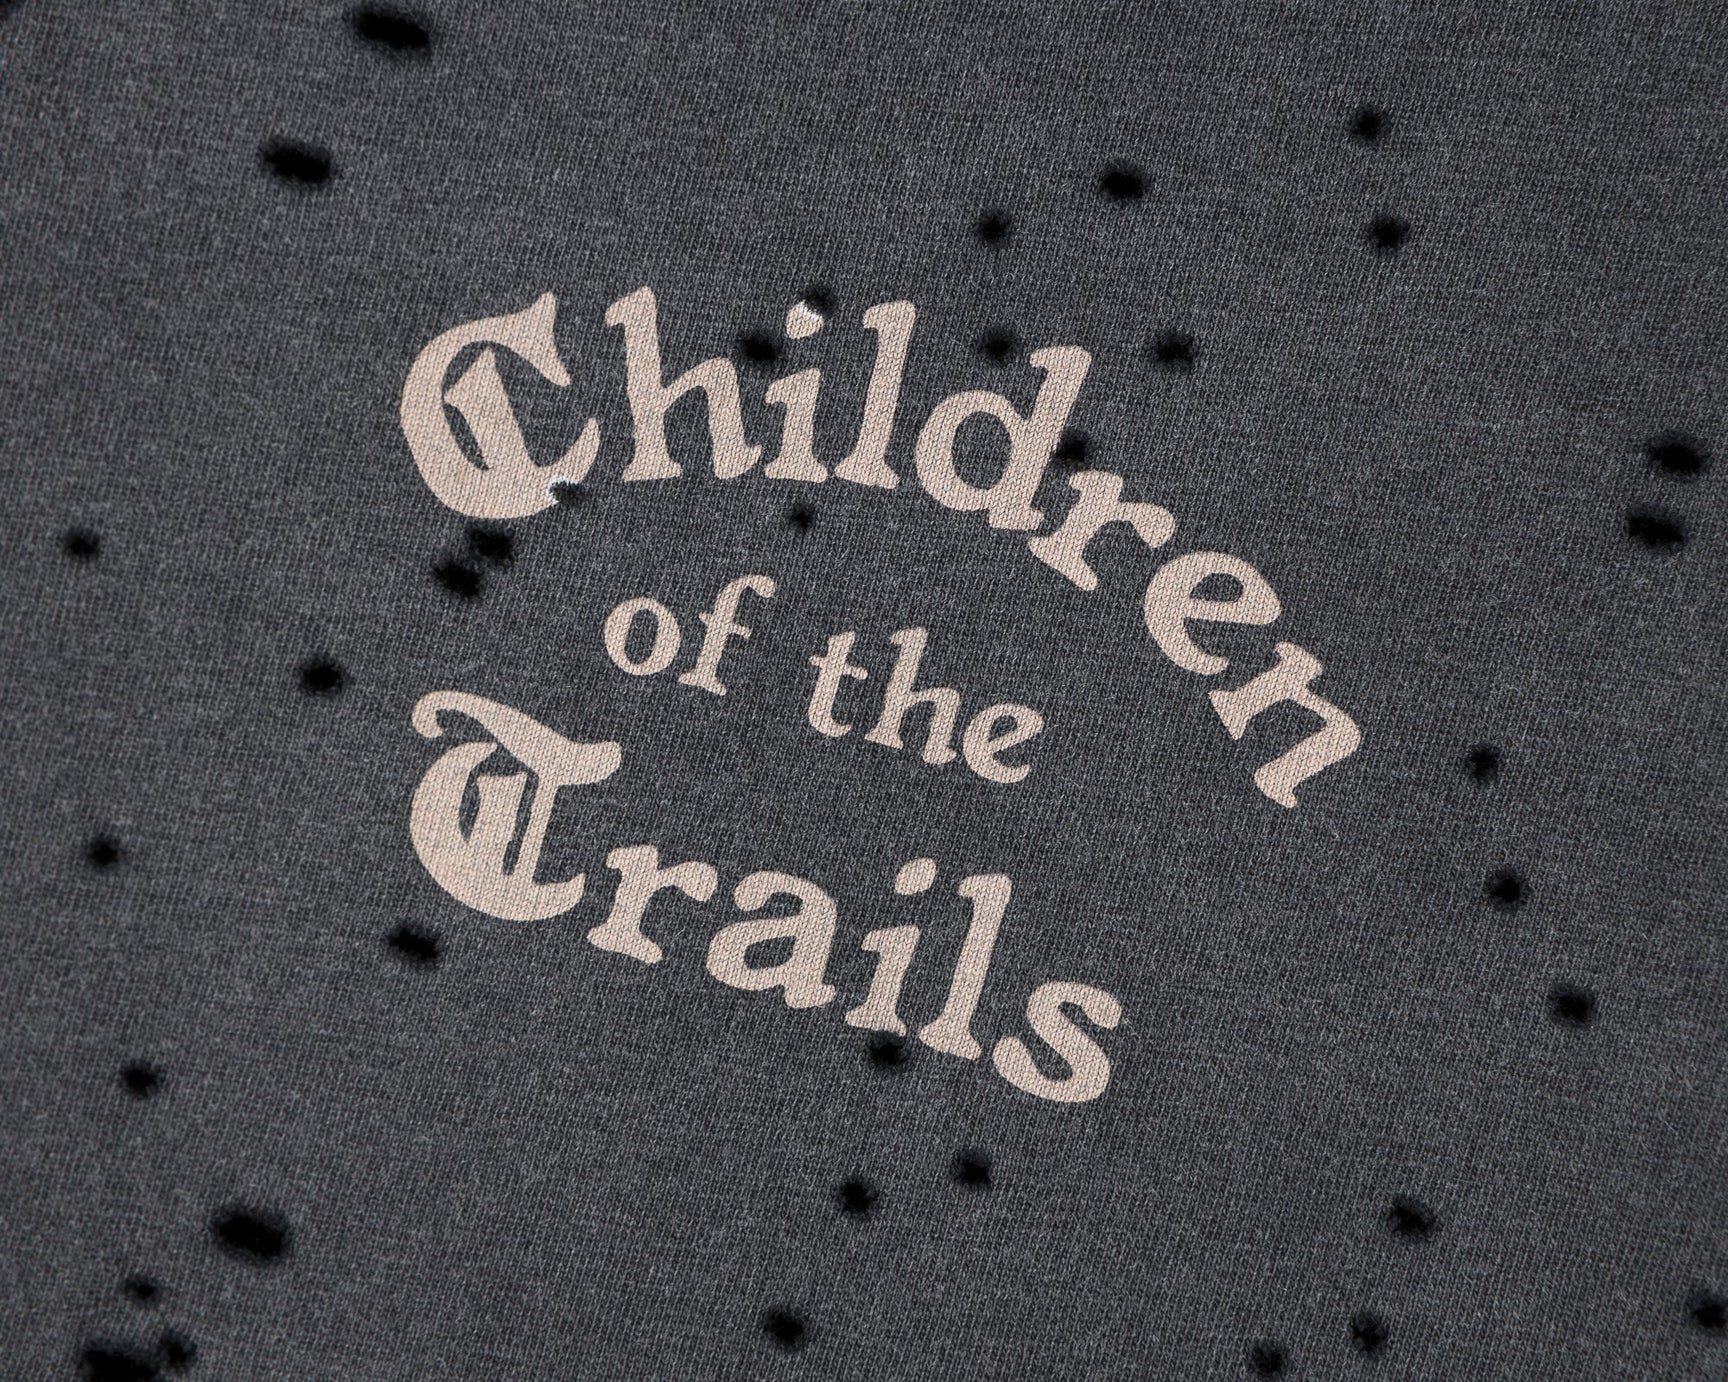 SATISFY - MothTech T-shirt - Children of the Trails - Space Camp